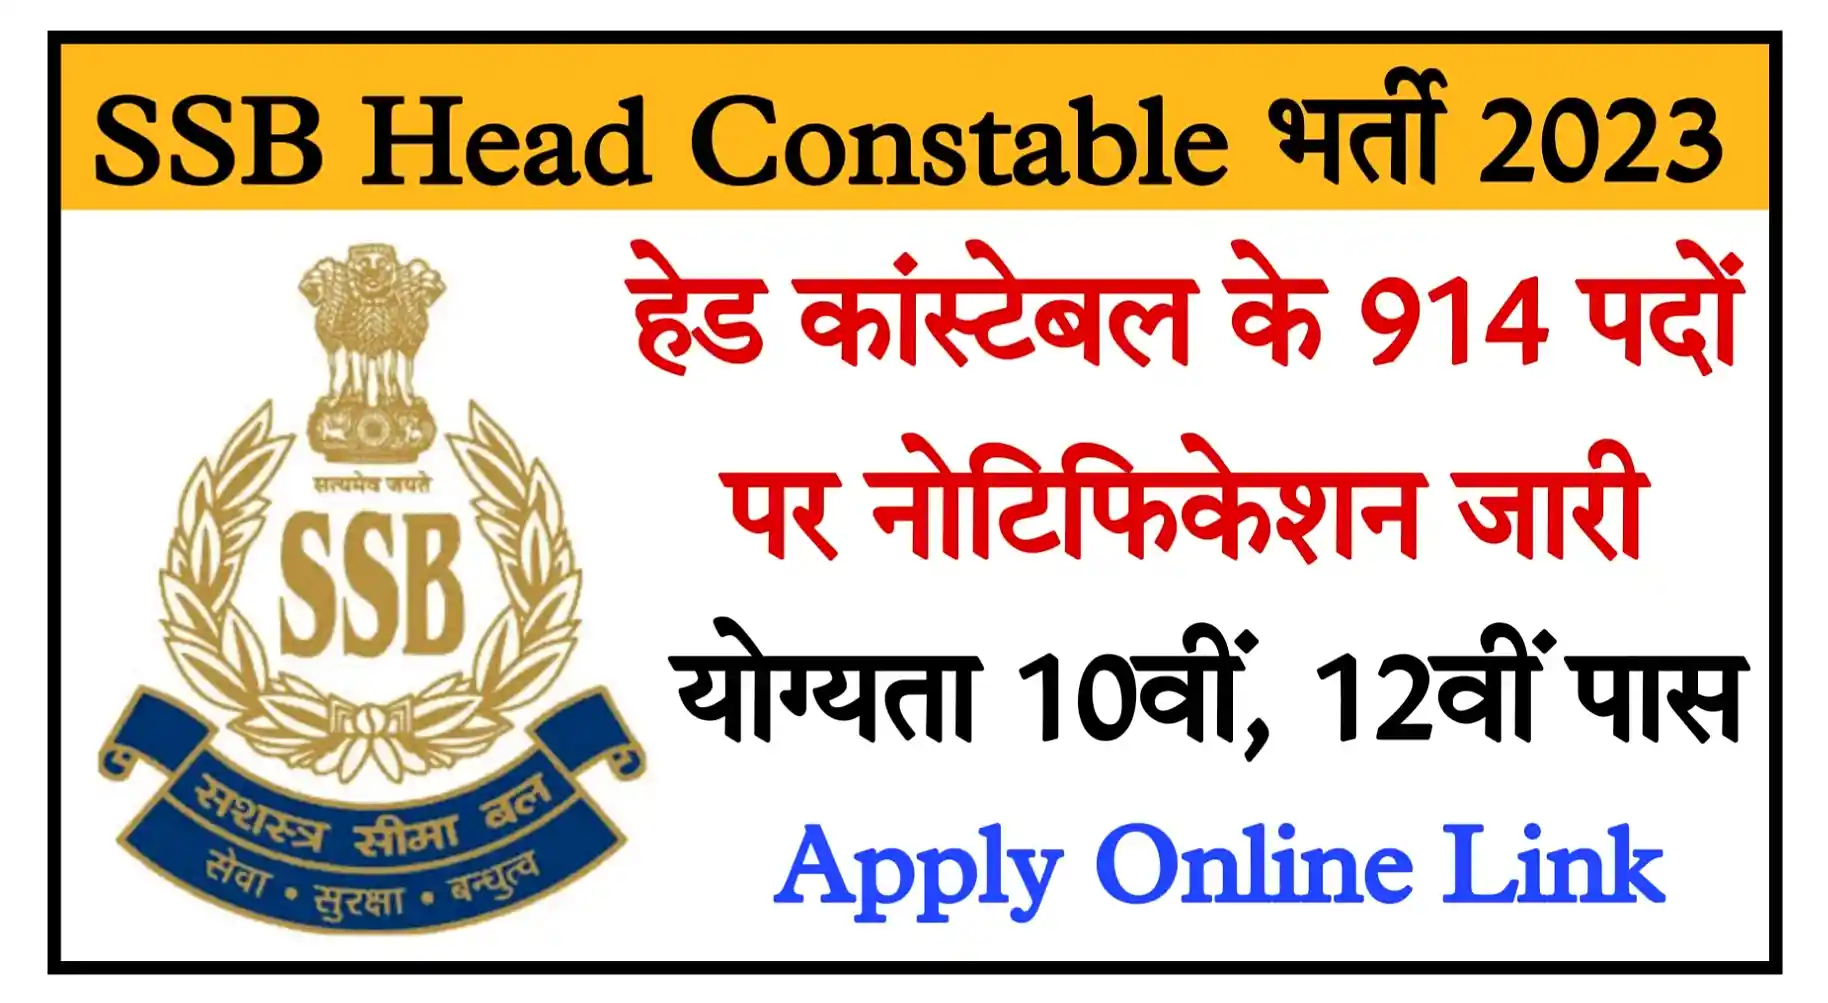 SSB Head Constable Recruitment 2023 Apply Online For 914 Posts, Exam Date Check All Details